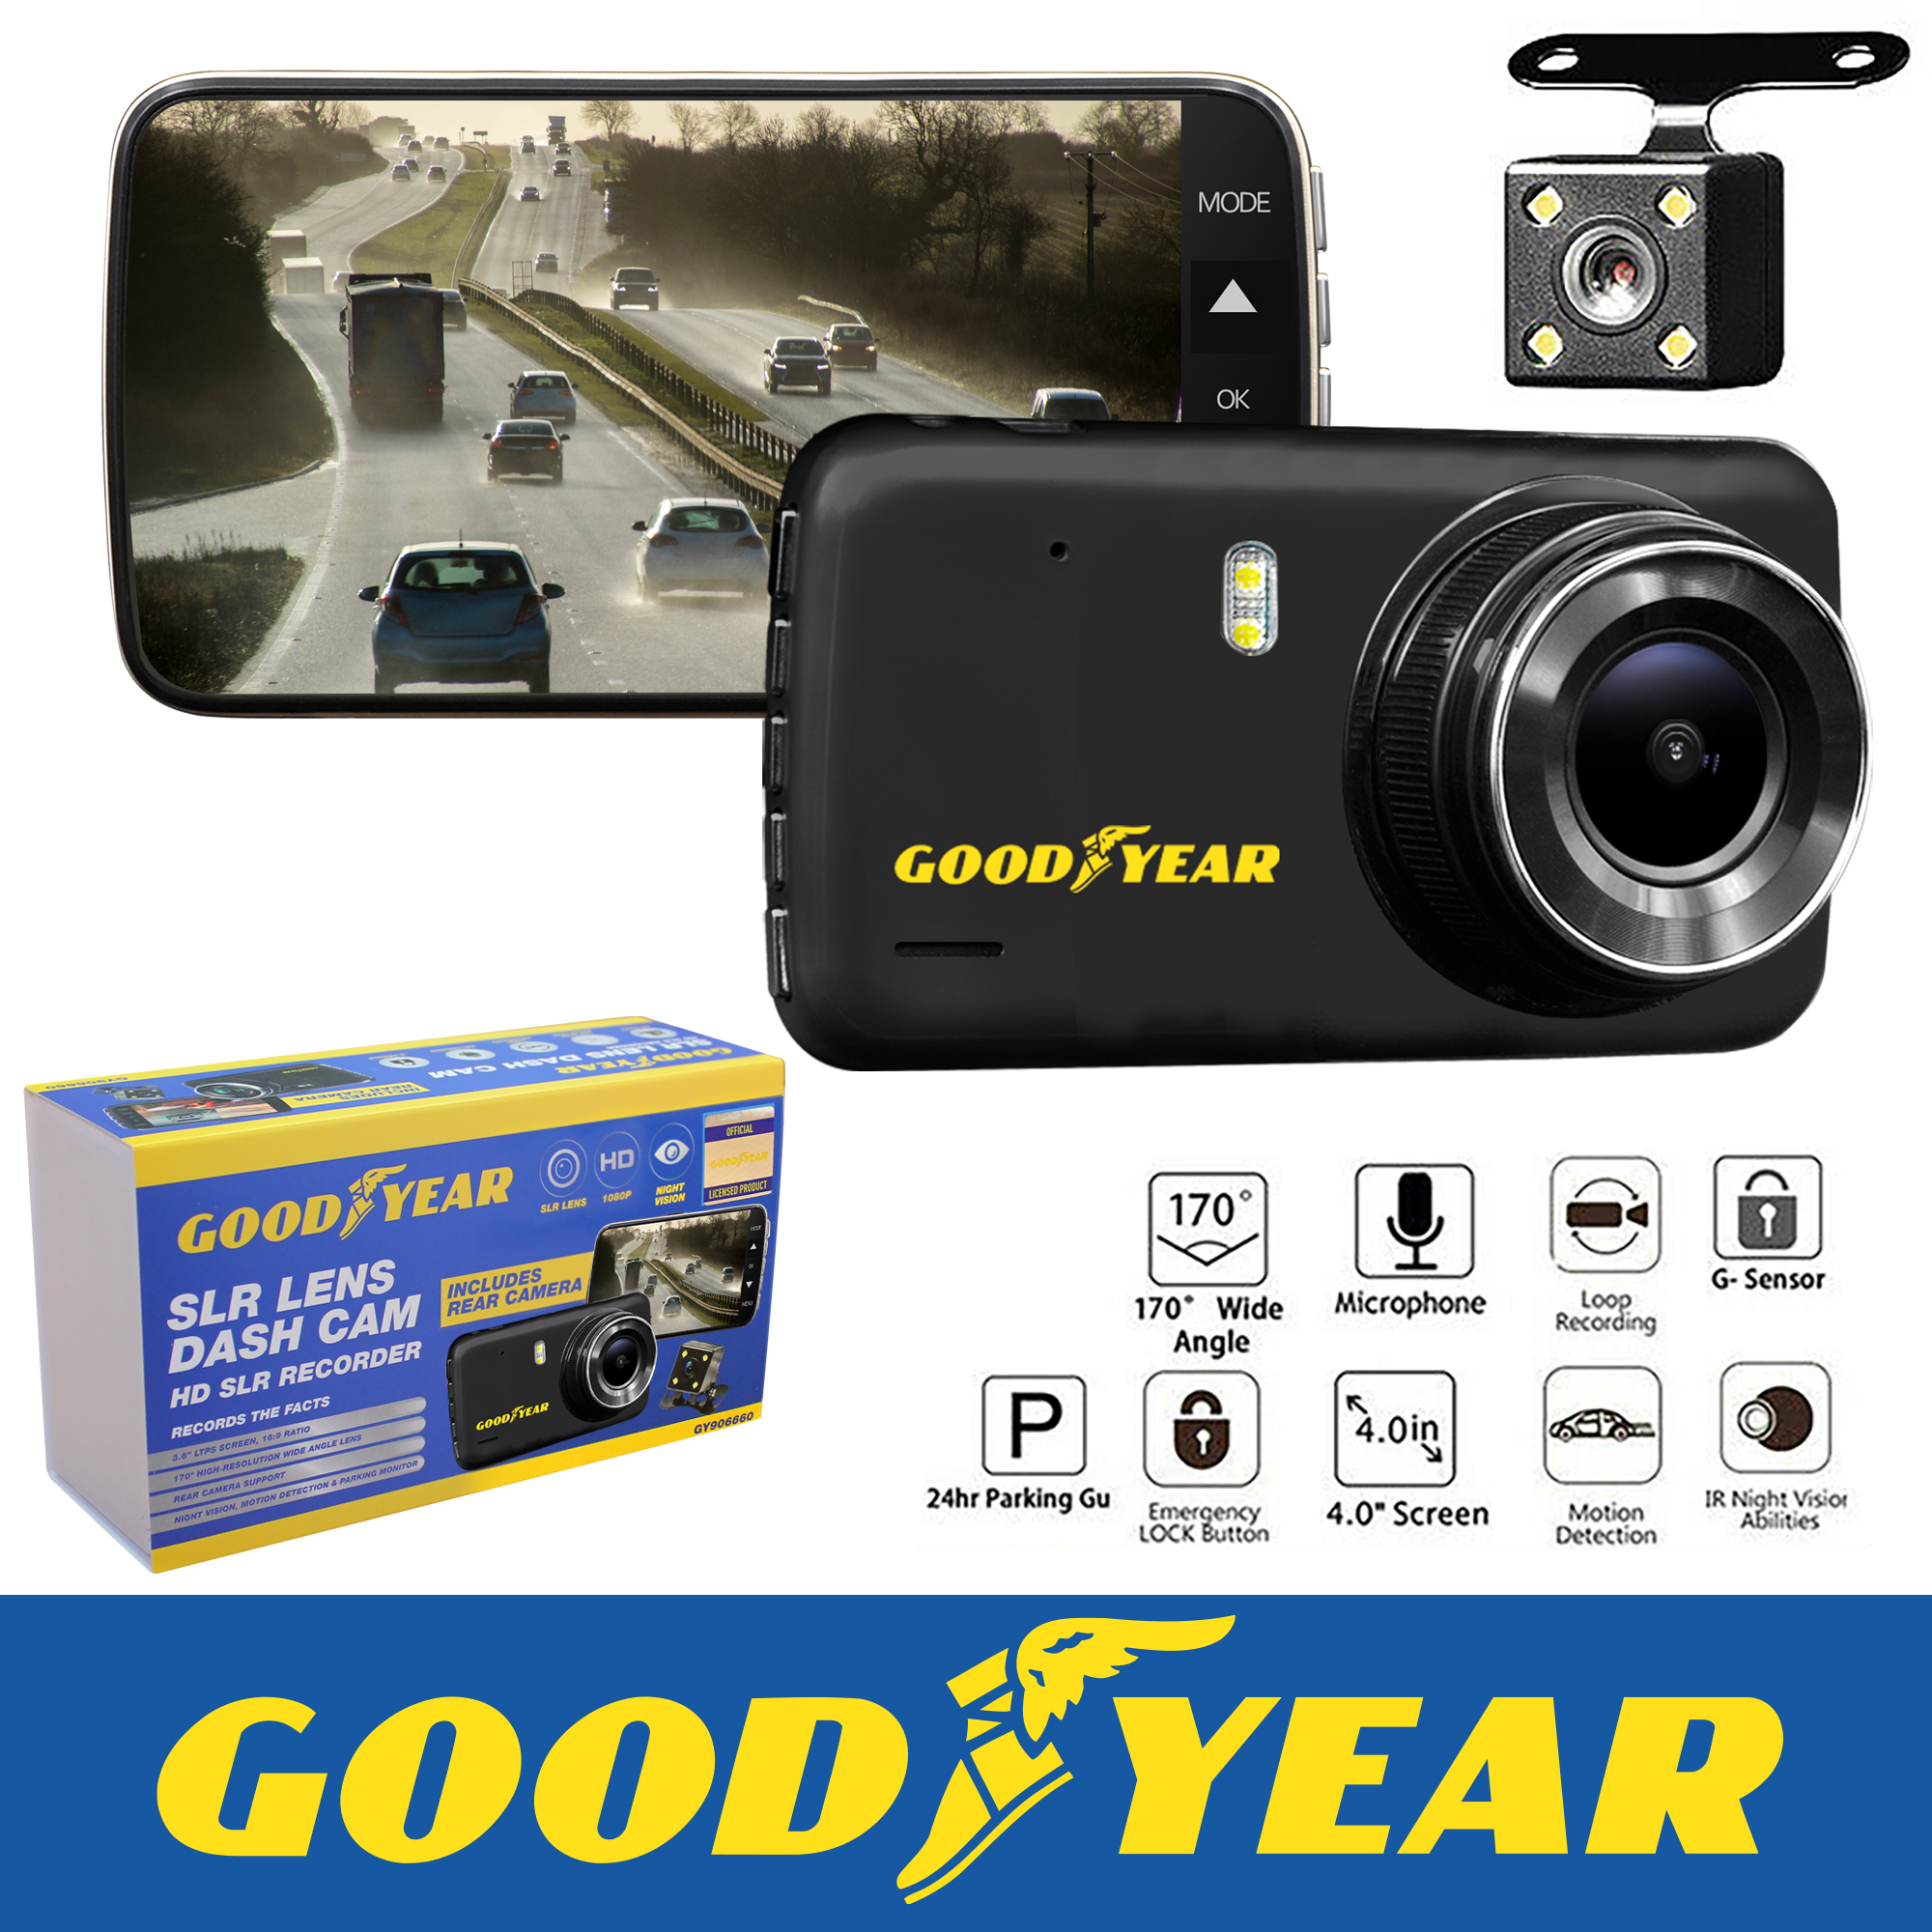 Goodyear 1080P Dual Lens Car DVR Front and Rear Camera Video Dash Cam  Recorder